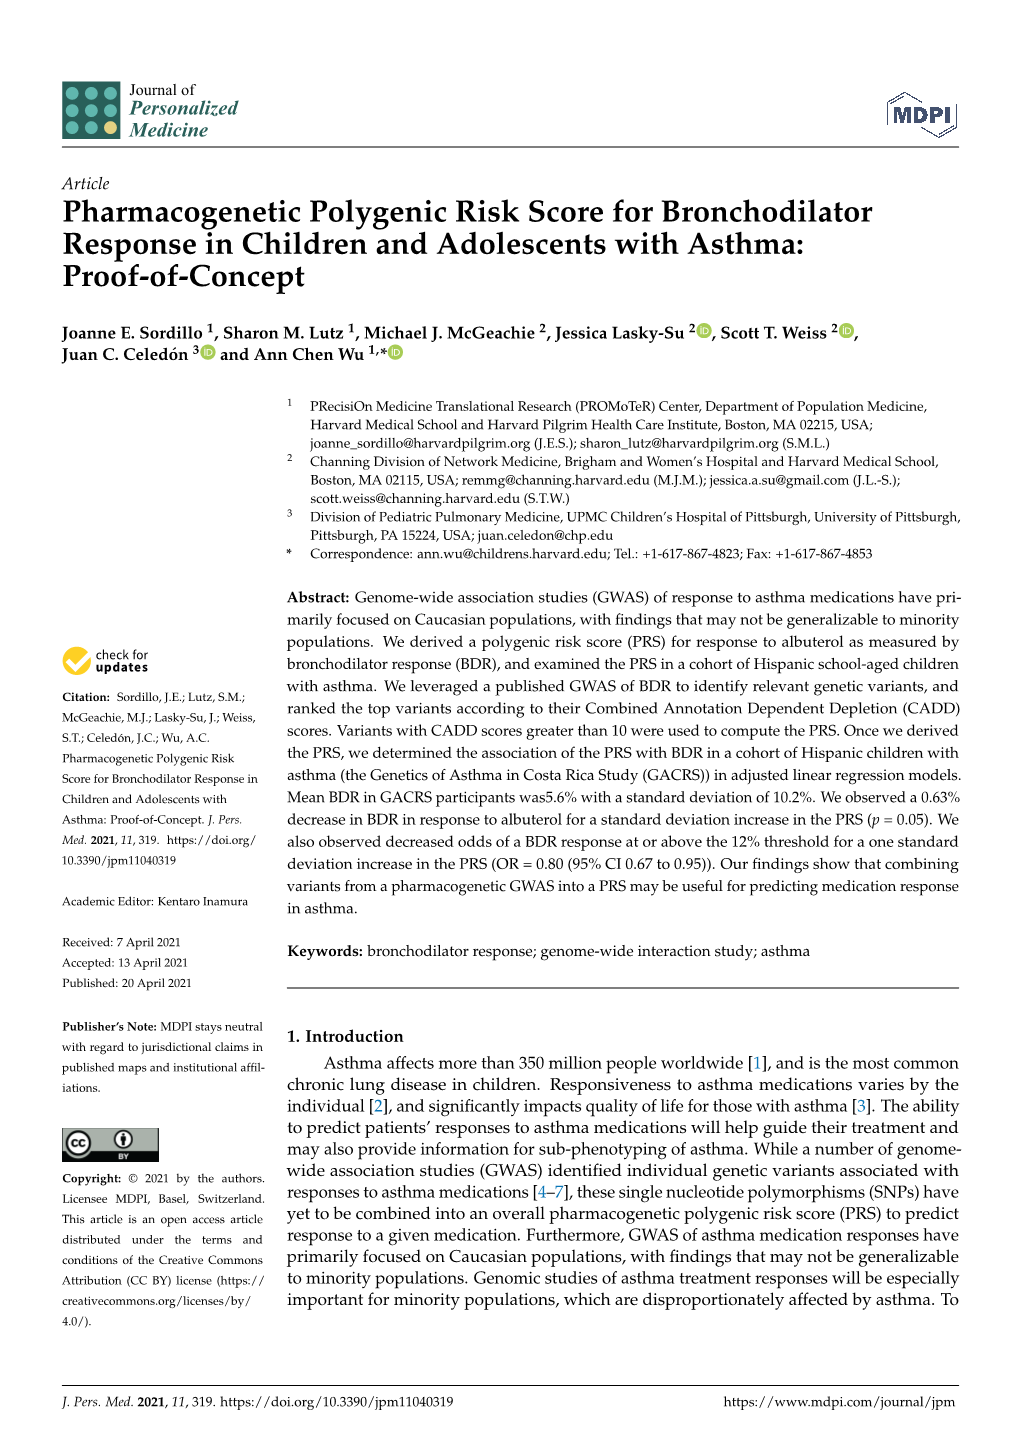 Pharmacogenetic Polygenic Risk Score for Bronchodilator Response in Children and Adolescents with Asthma: Proof-Of-Concept